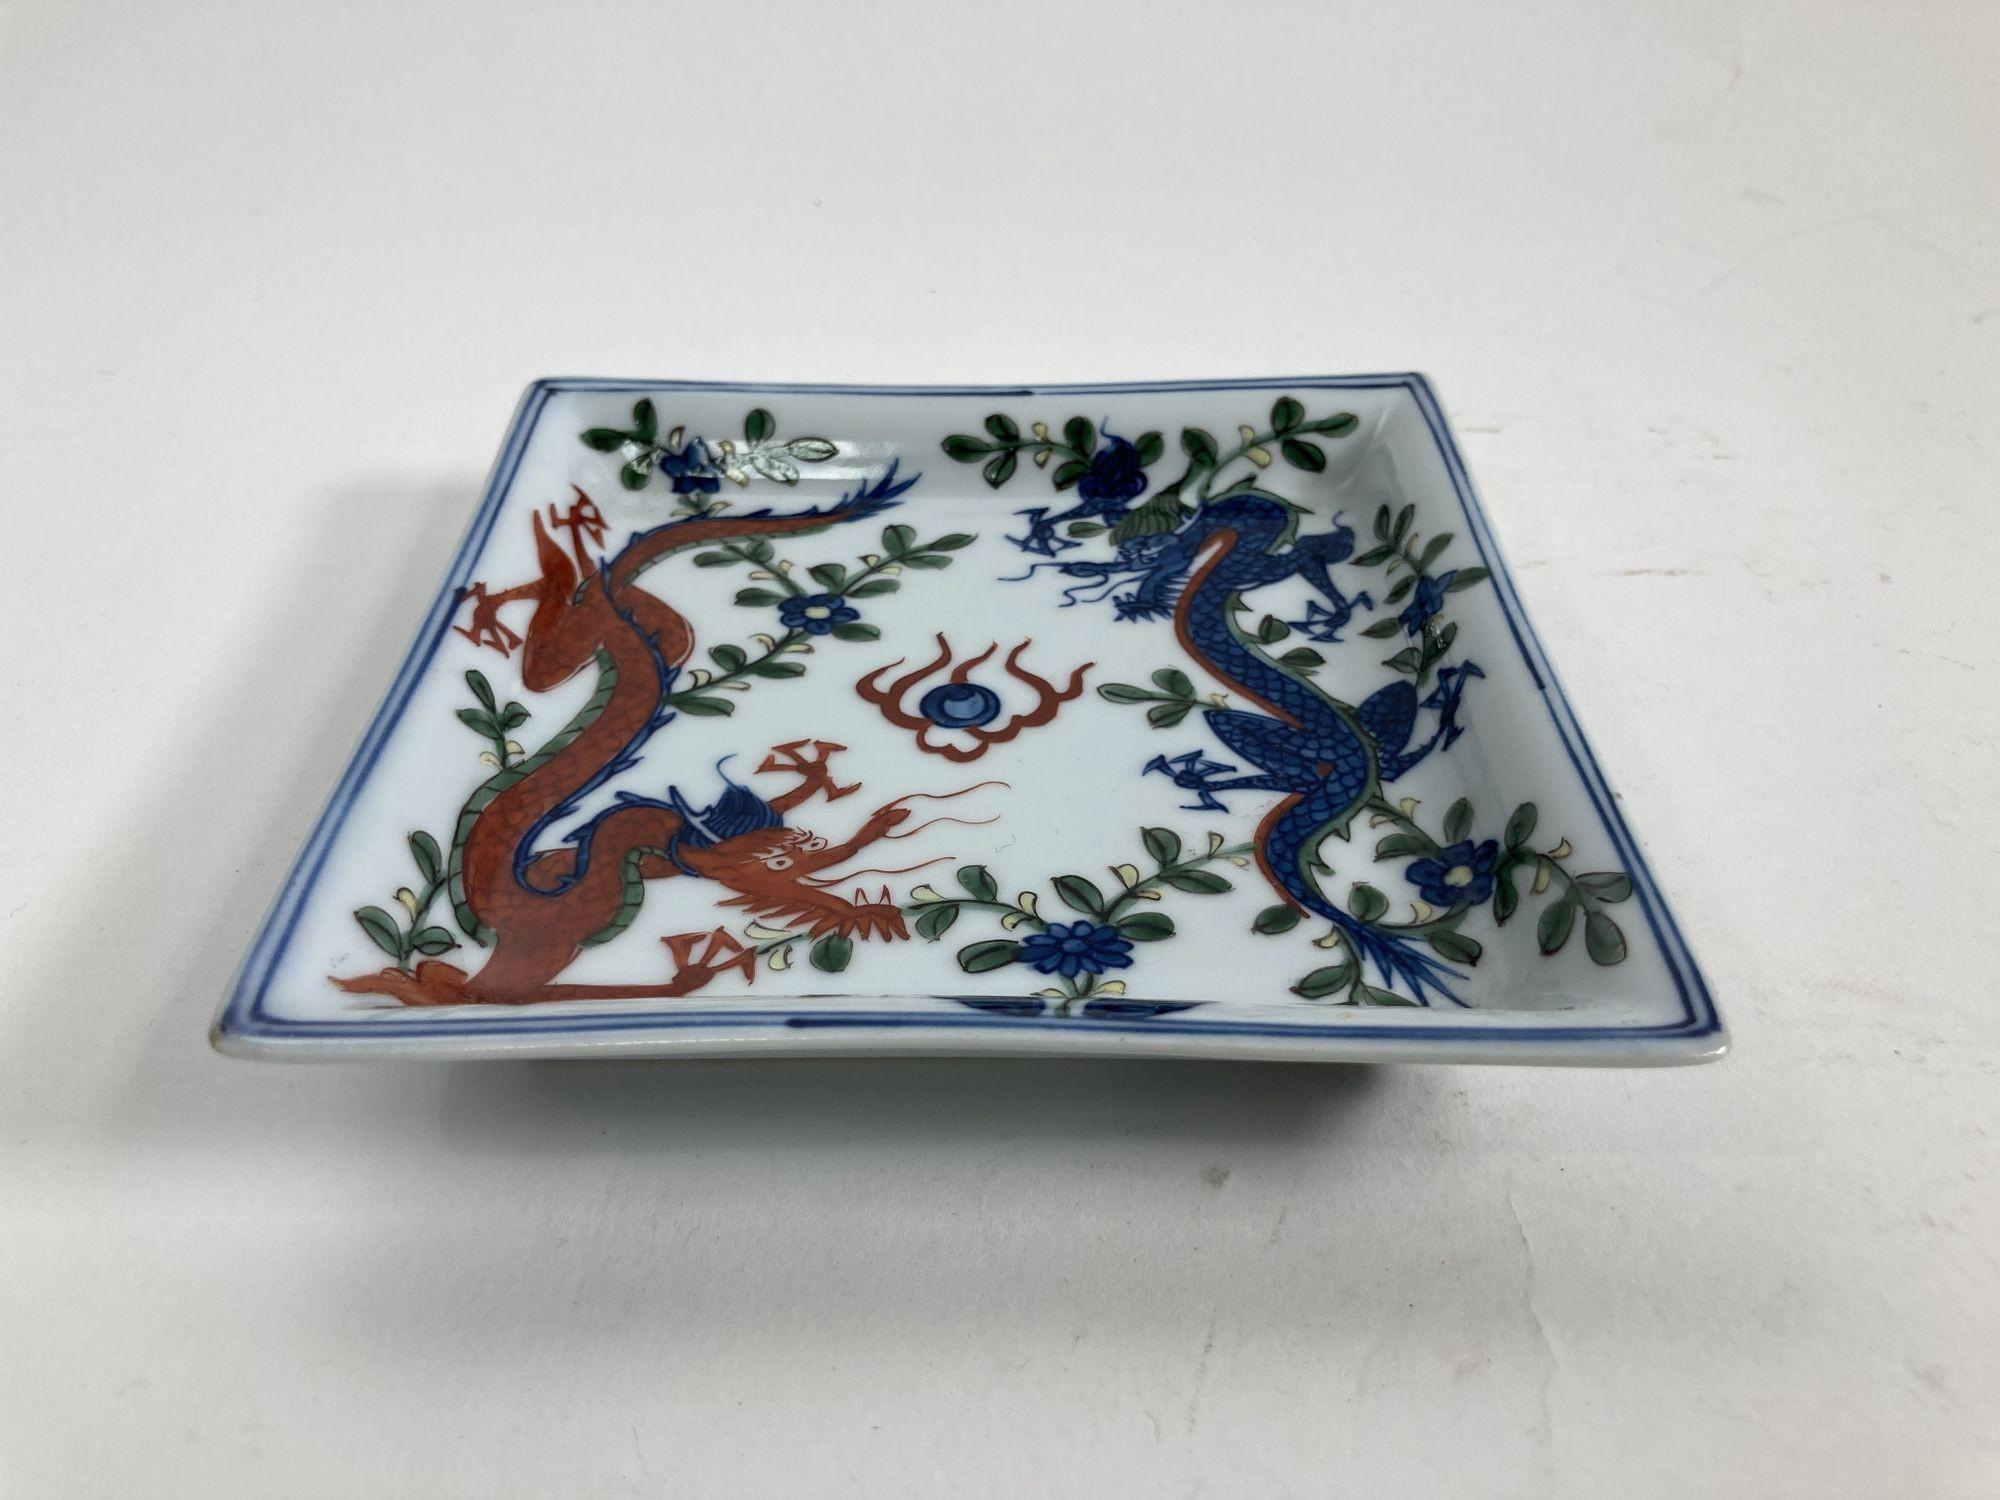 Vintage Asian square porcelain dish, ashtray or catchall.
Chinese Wanli Wucai style porcelain square dish with dragons and floral decoration. 
Asian themed white square porcelain hand painted with a blue dragon and one red dragon chasing a fire